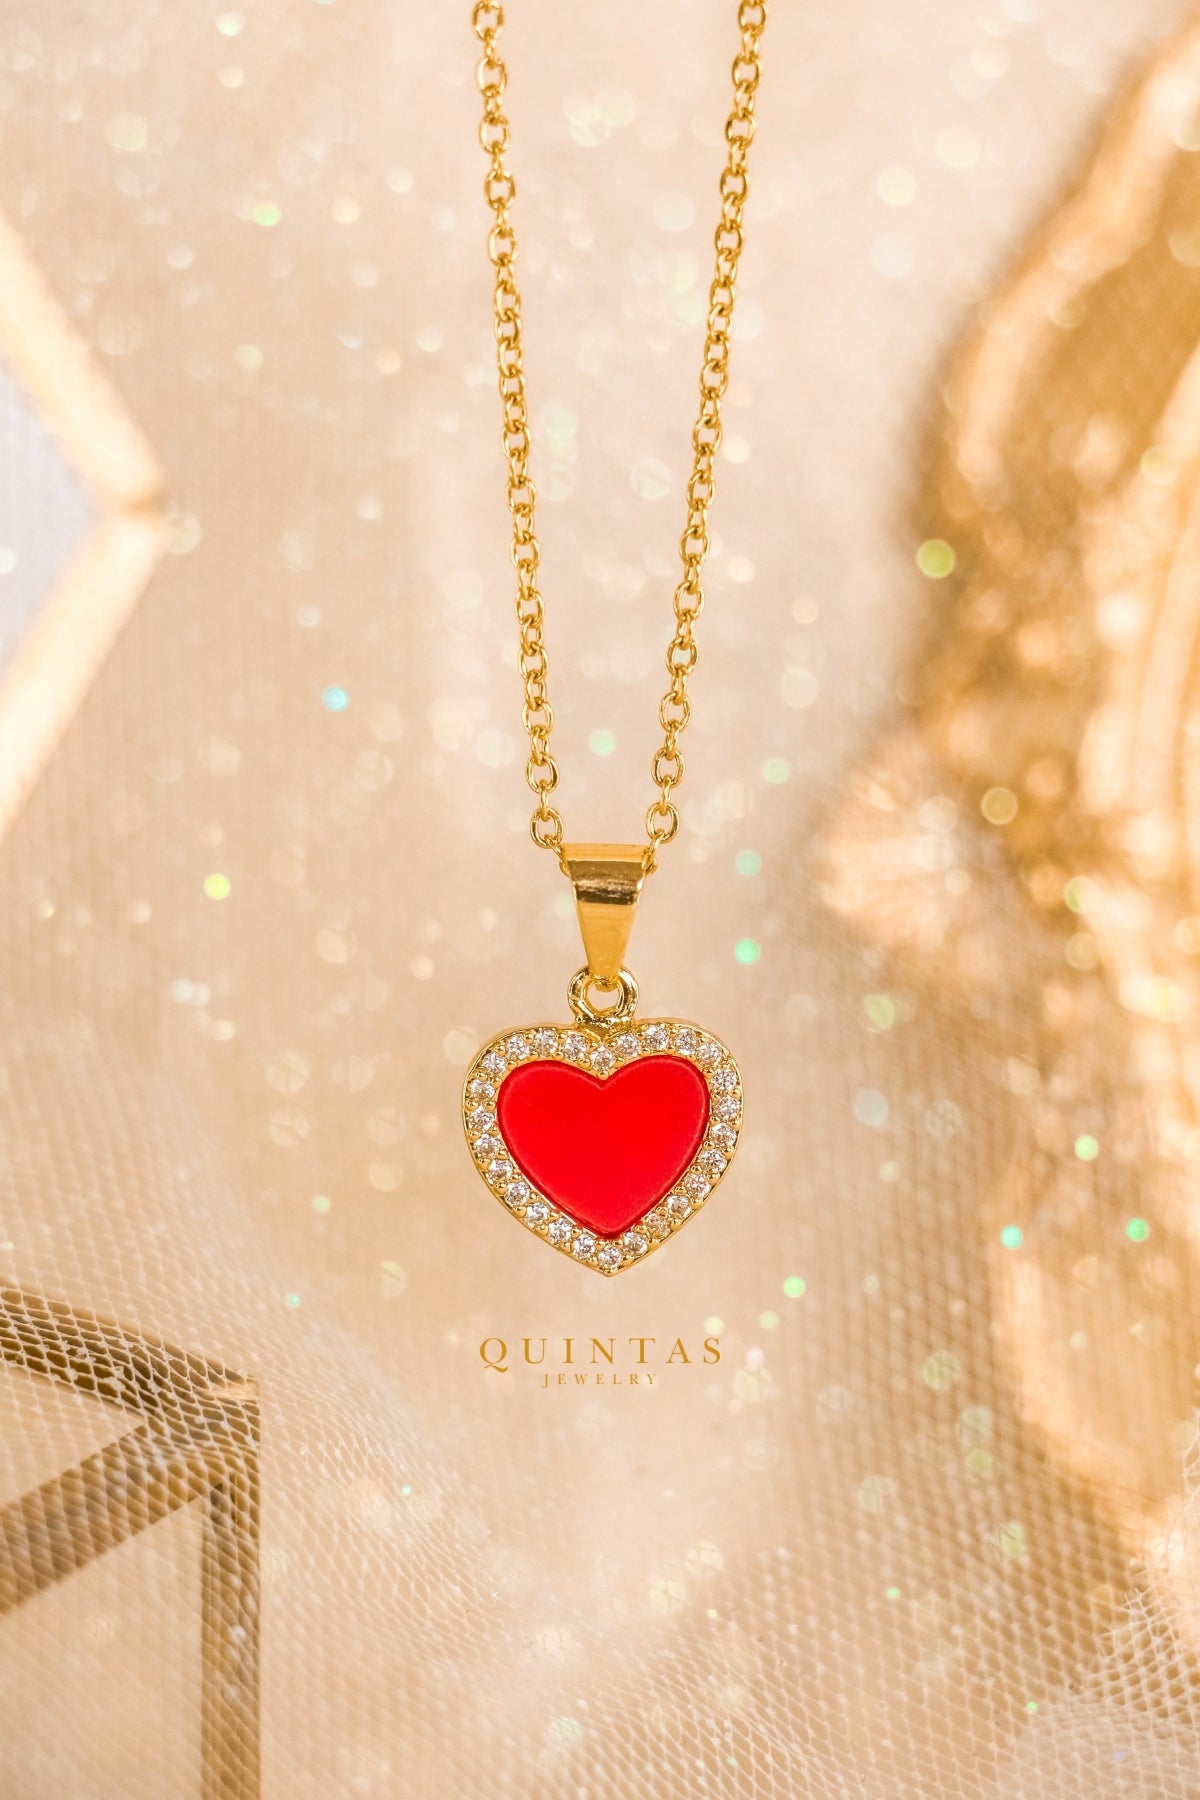 Colors of the Heart Necklace